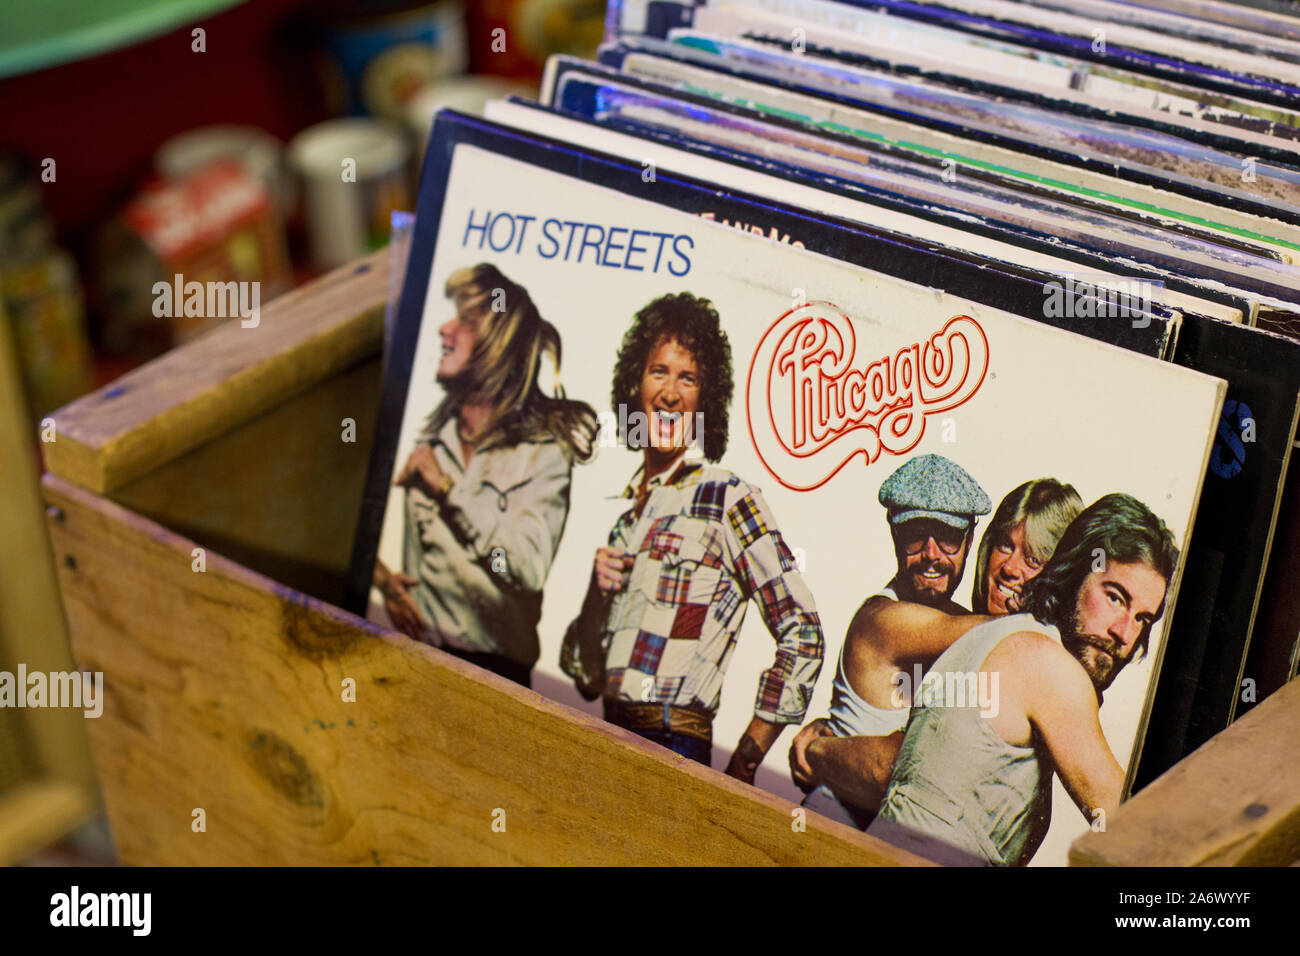 Thorp, Washington / USA - August 12, 2018:  Vintage Chicago album in an antique shop and fruit stand outside of Ellensburg, Washington. Stock Photo